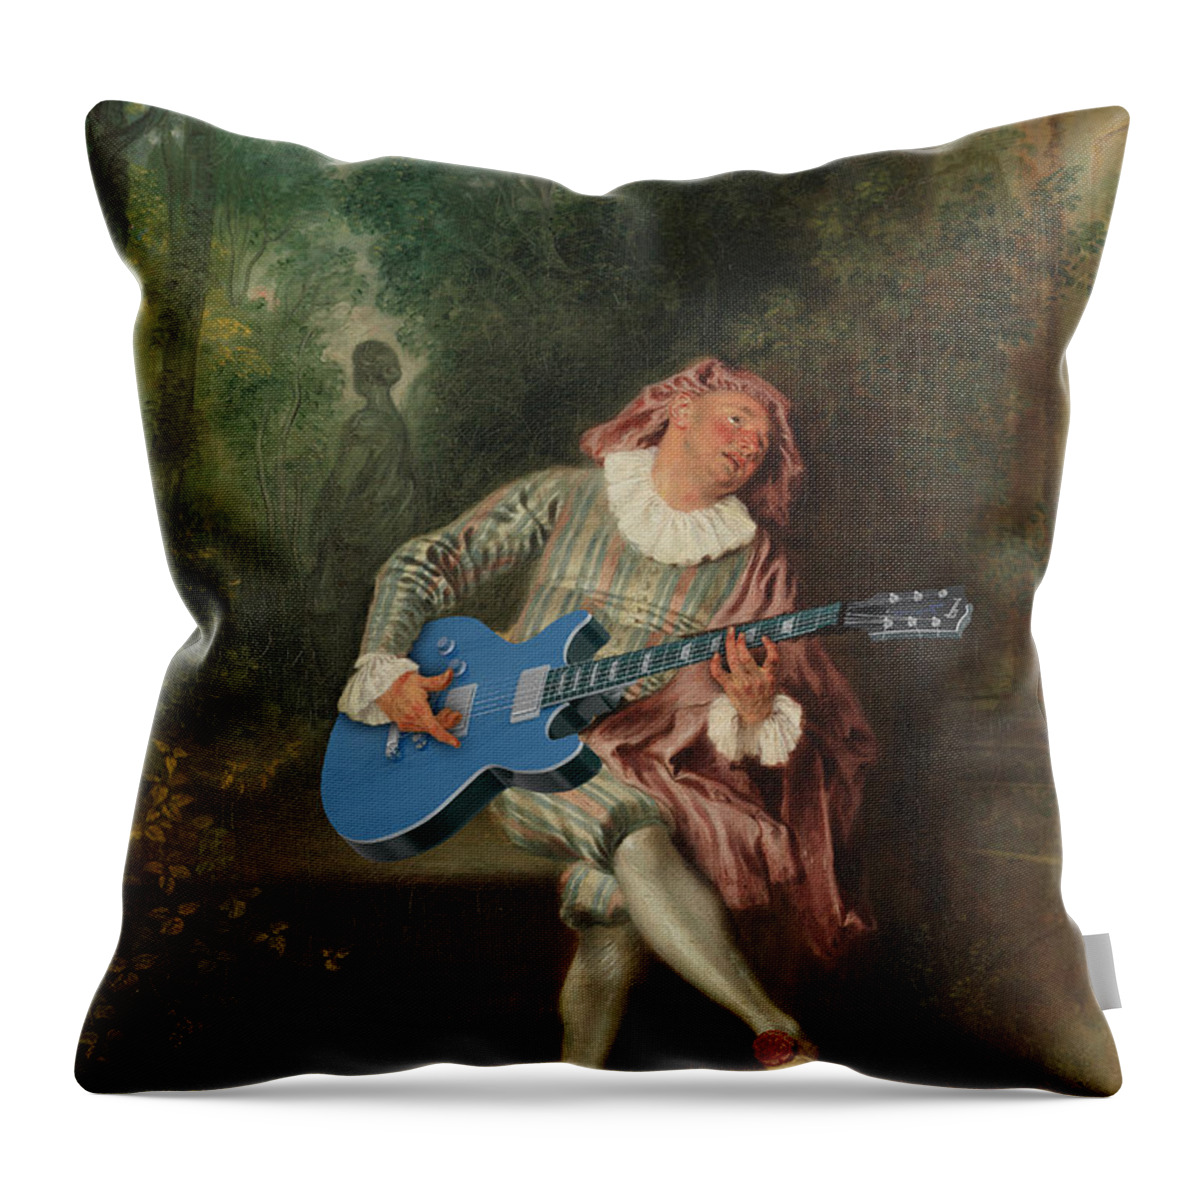 17th Century Throw Pillow featuring the painting Guitar Classic Painting by Tony Rubino